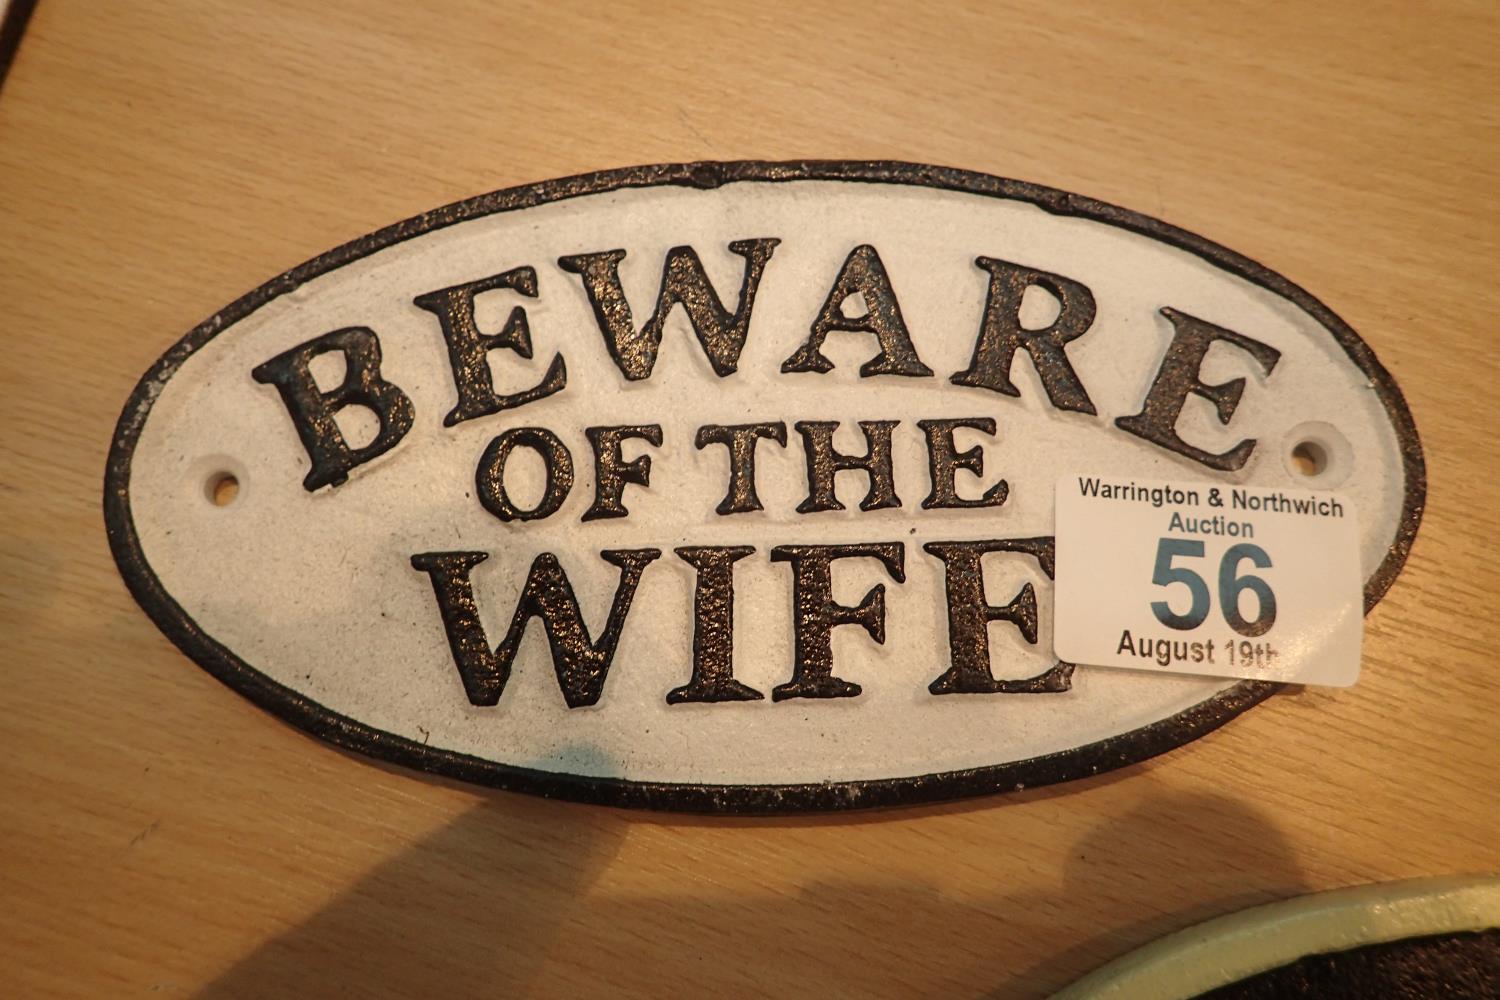 Cast iron Beware of the Wife sign, L: 17 cm. P&P Group 2 (£18+VAT for the first lot and £3+VAT for